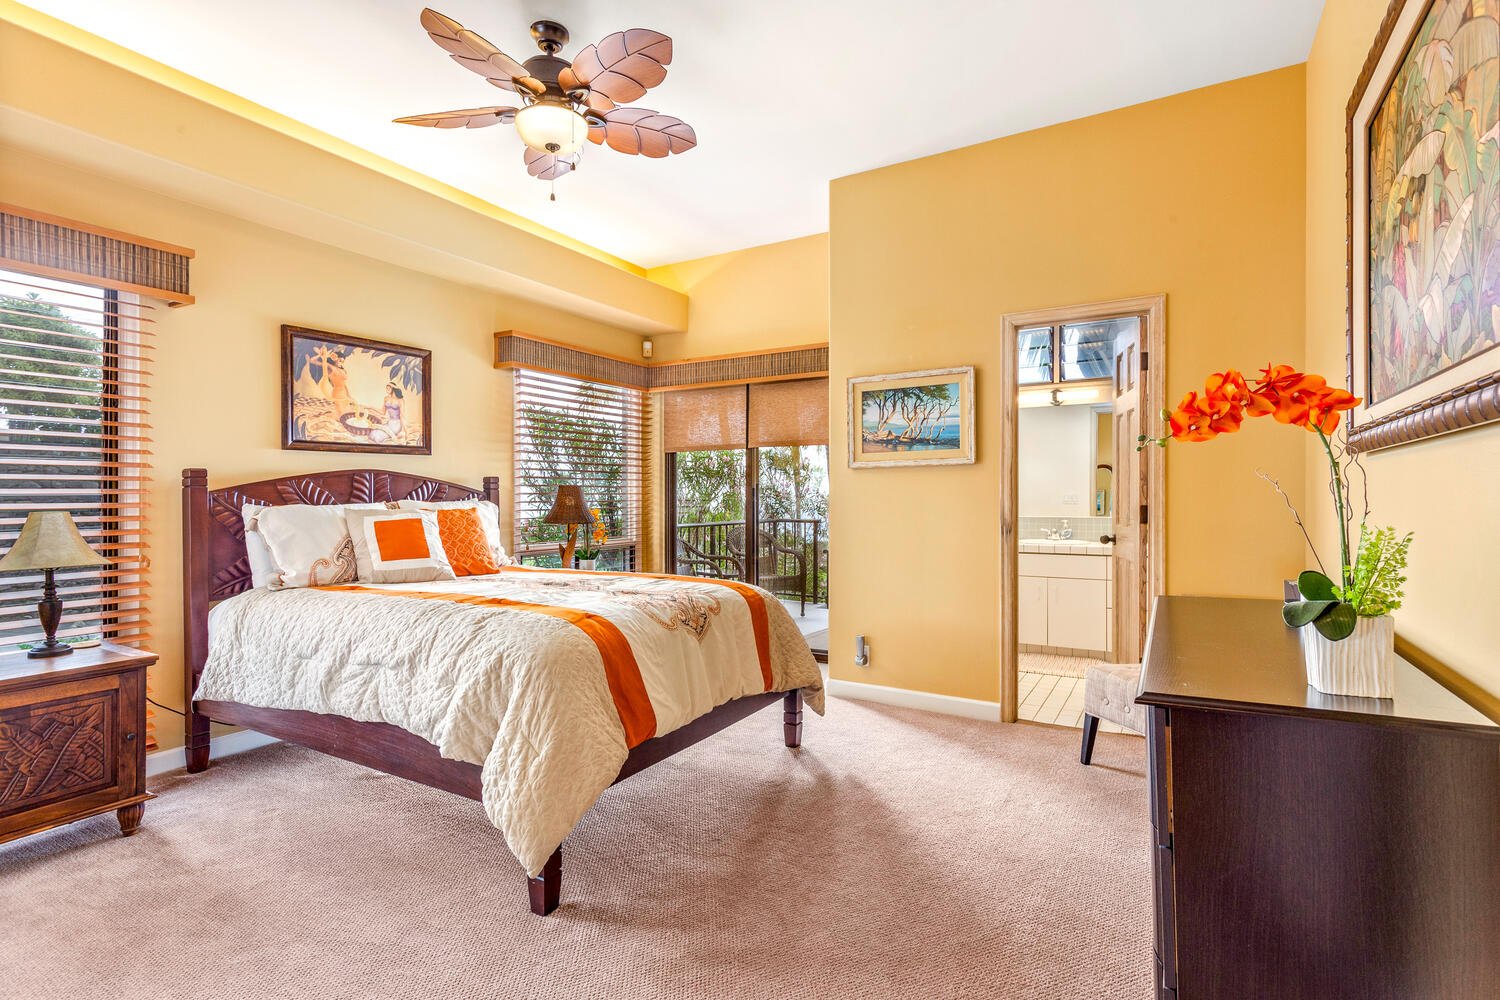 The second guest room has ocean views, a separate lanai, queen bed and en suite bath.